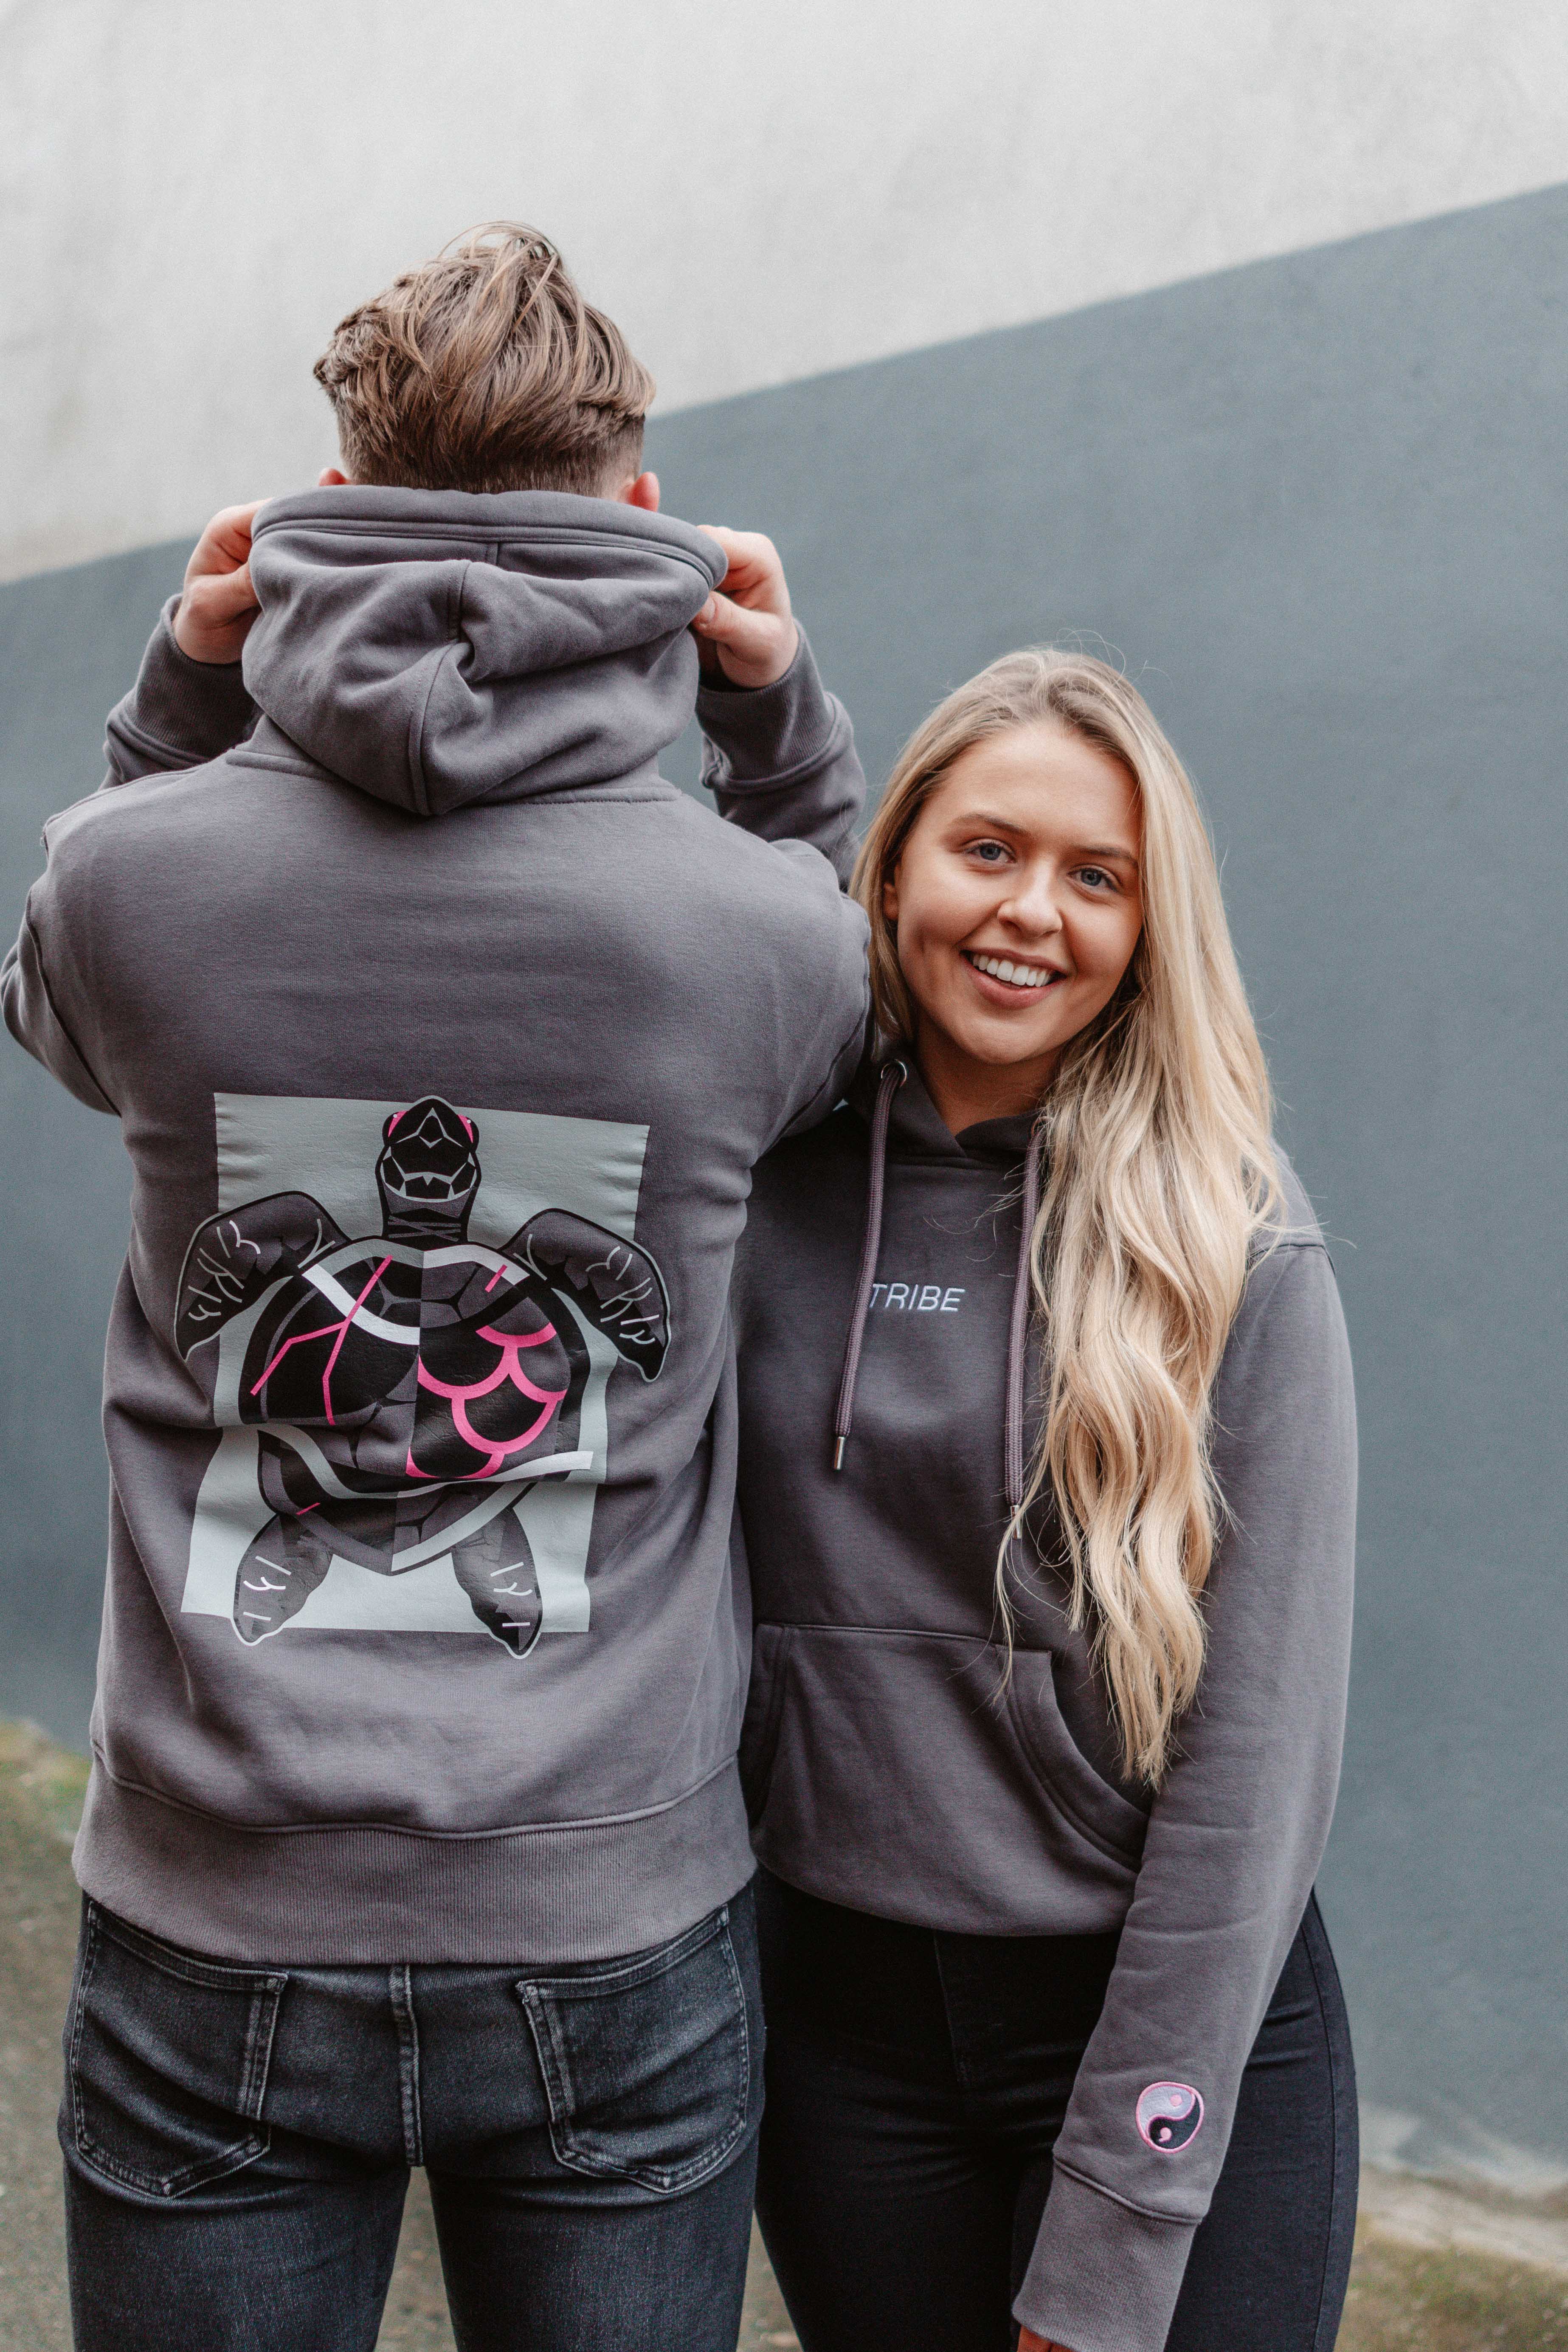 Tribe Limited Edition Dan Leo 'Turtle' Hoodie €60 all profits go to Jigsaw to support its work with youth mental health.

www.tribecharity.com/hoodie

For further information contact 
Mari O'Leary 01 6789888 - marioleary@olearypr.ie